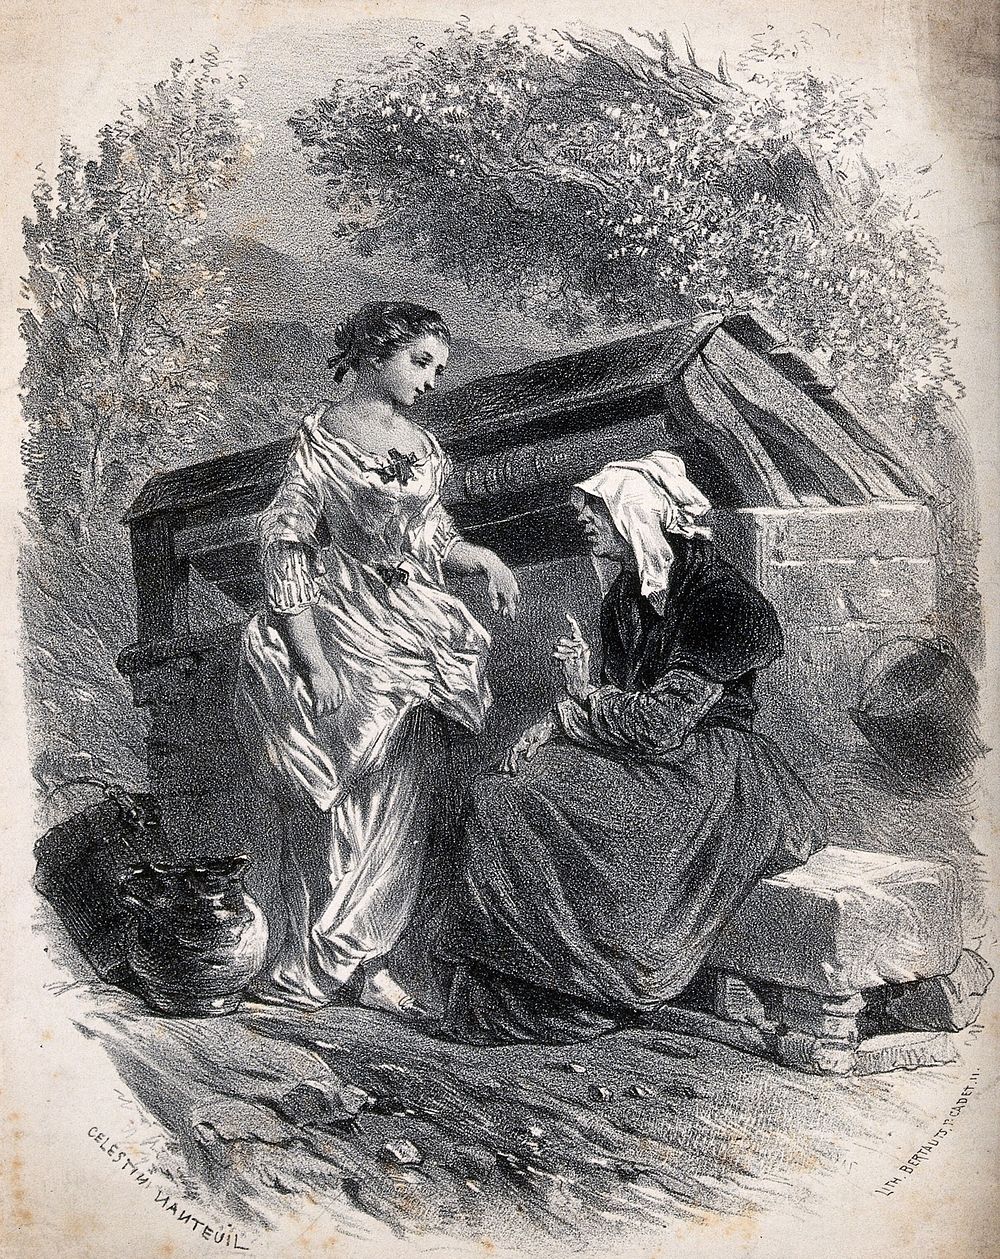 An old woman gives advice to a young woman at a well. Lithograph by Bertaut after C. Nanteuil.